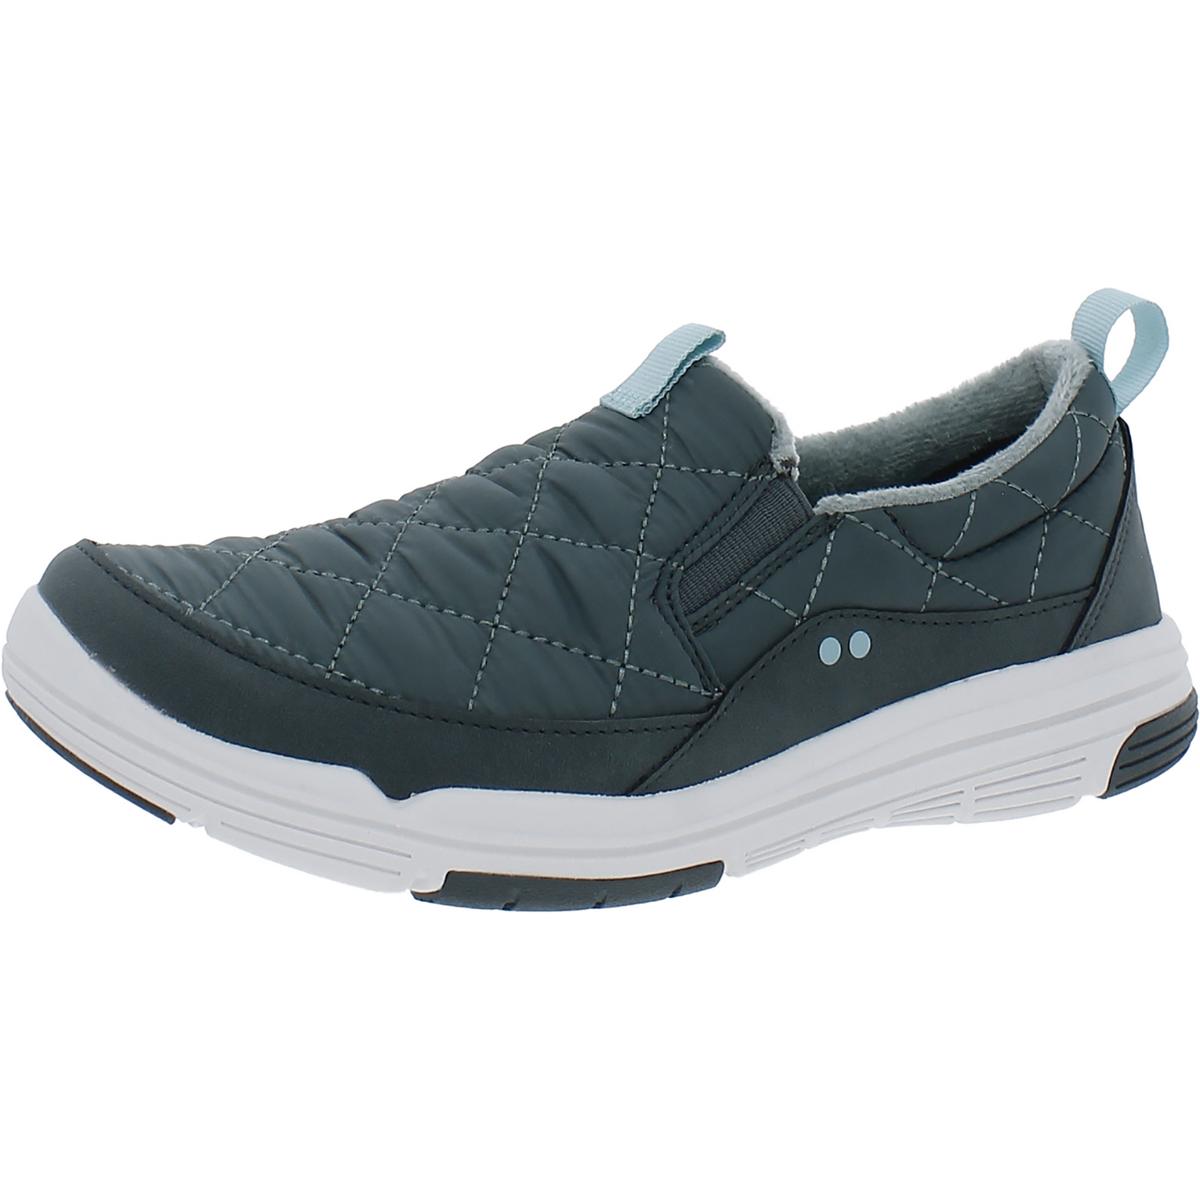 Ryka Womens Ava Quilted Slip On Casual and Fashion Sneakers Shoes BHFO 2477